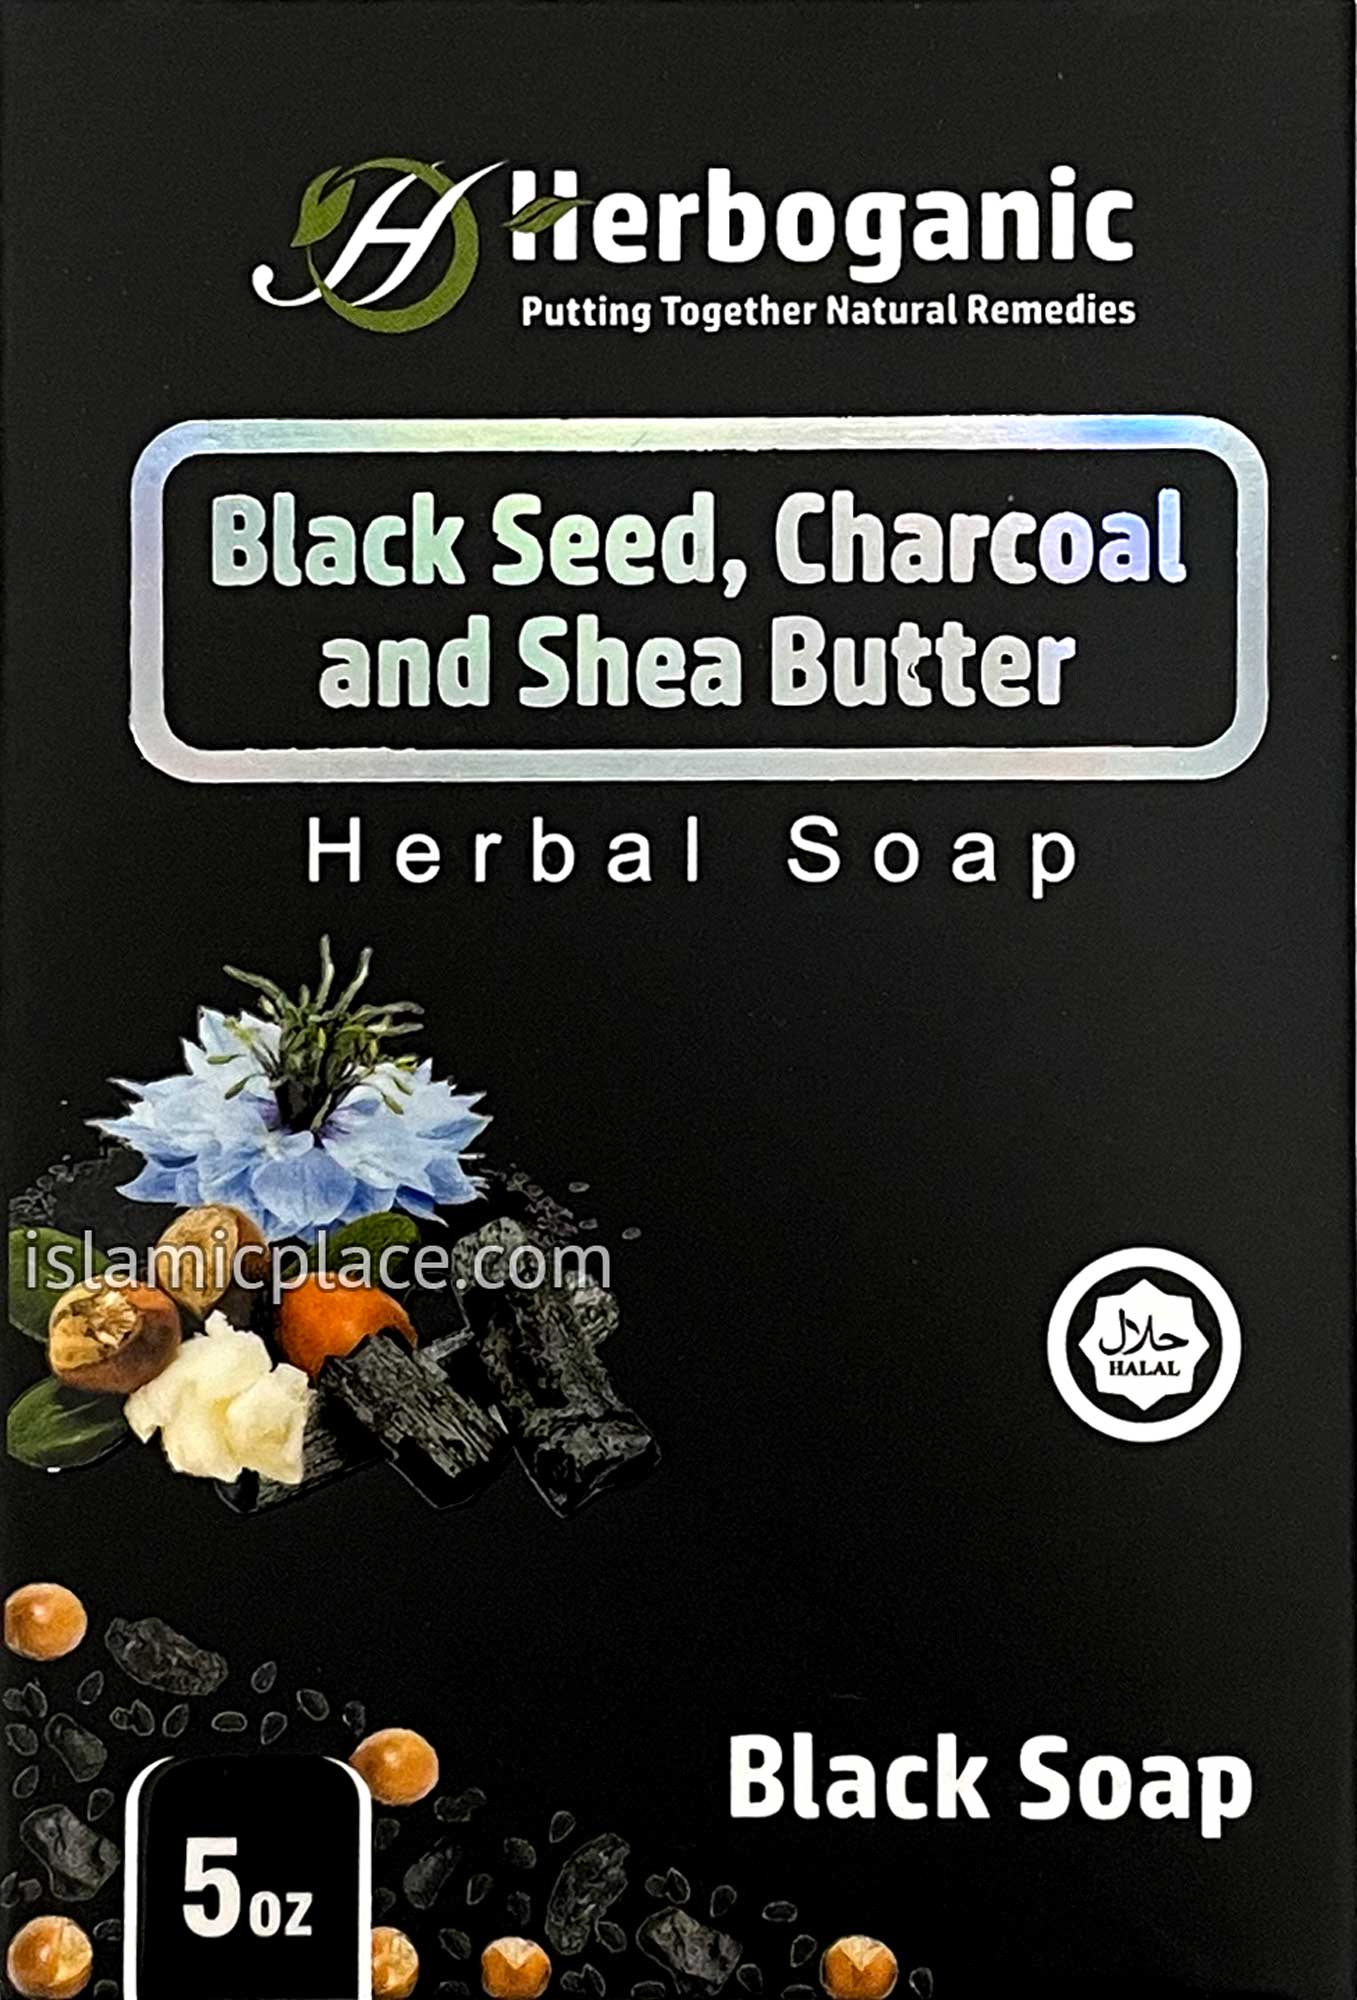 Black Seed, Charcoal and Shea Butter Herbal Halal Soap - 5 oz